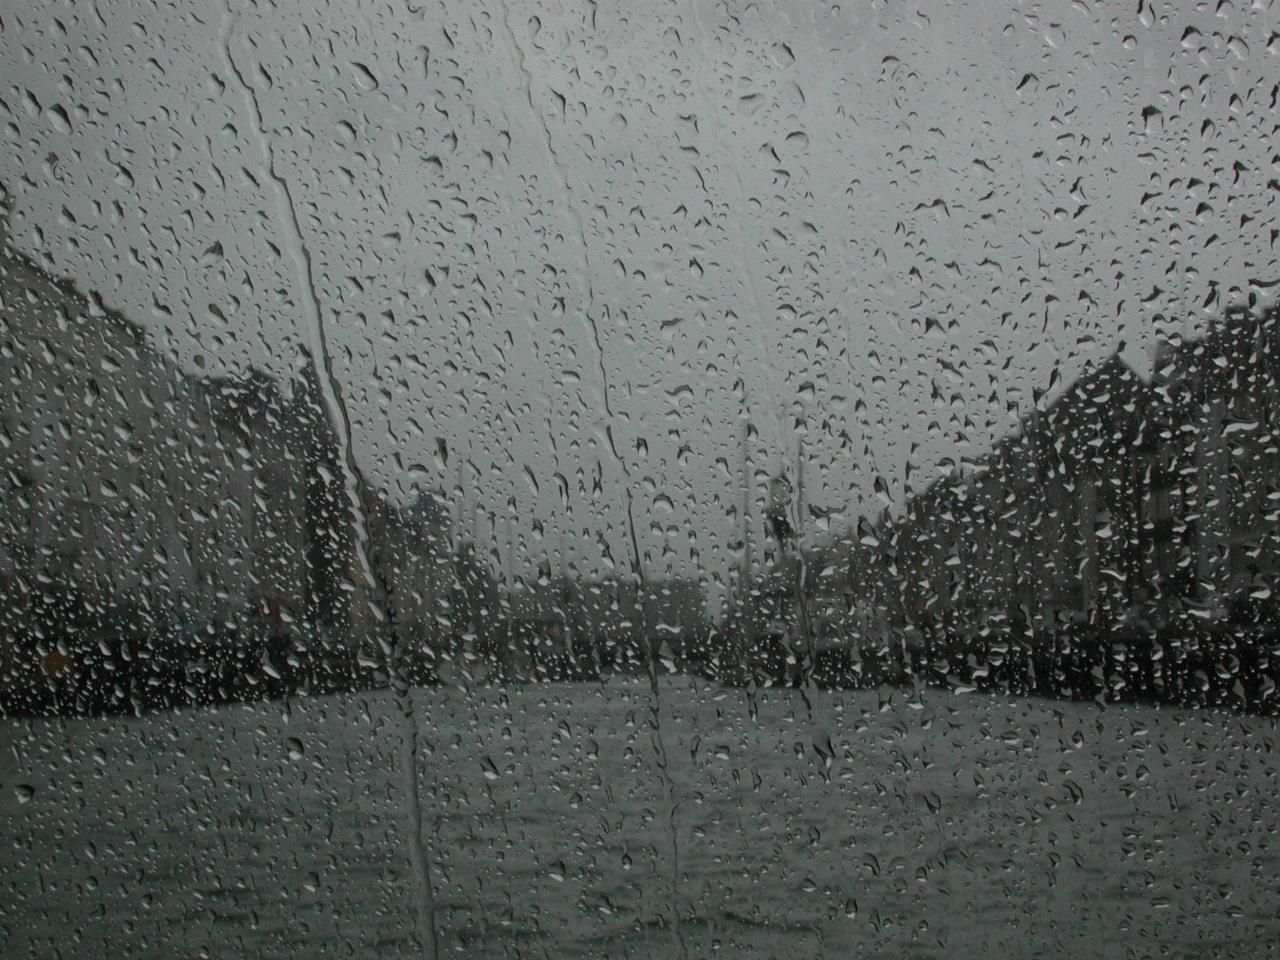 KPLU Viking Jazz: A wet day to see the canals of Copenhagen, probably at Nyhavn